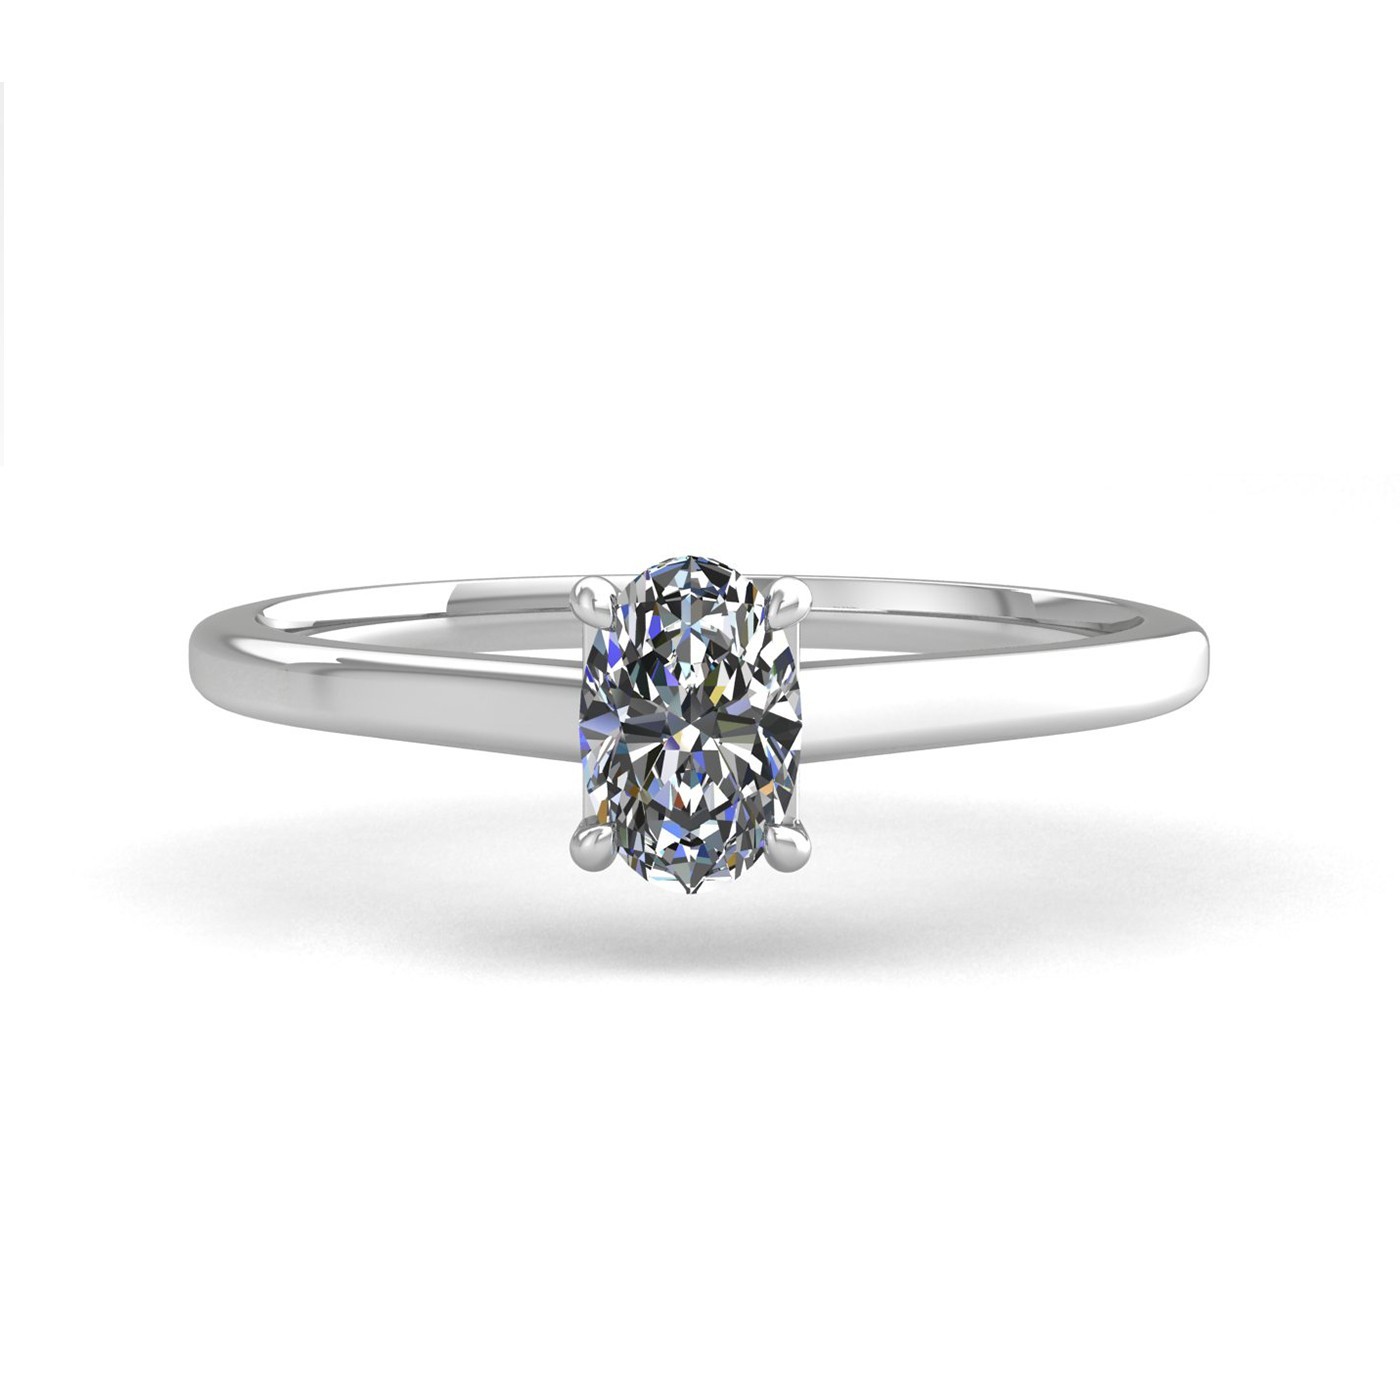 18k white gold  1,20 ct 4 prongs solitaire oval cut diamond engagement ring with whisper thin band Photos & images